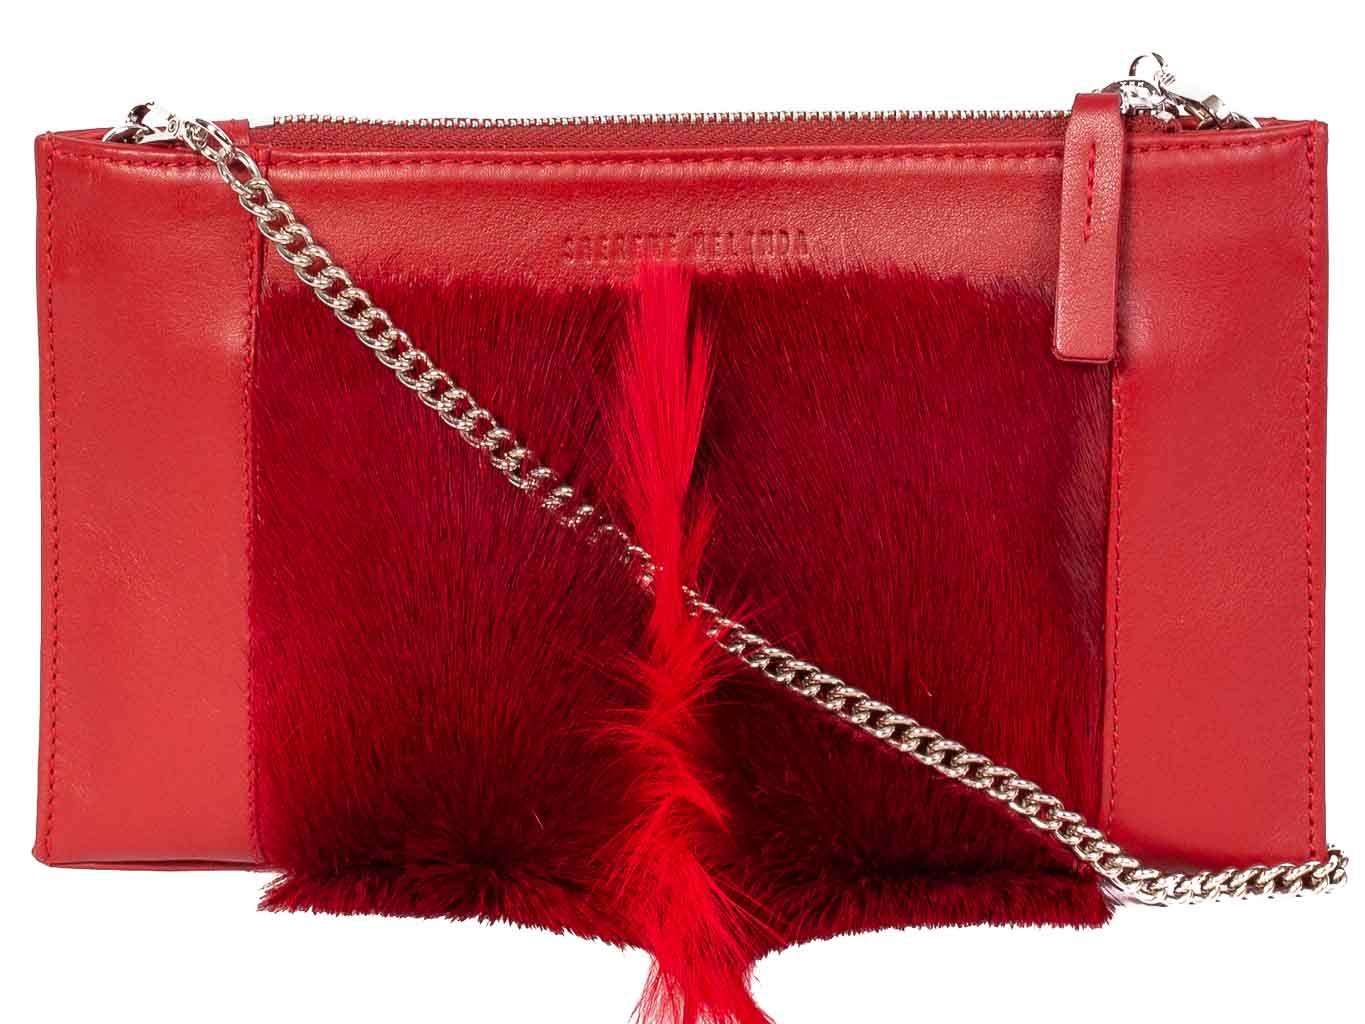 Clutch Springbok Handbag in Crimson Red with a fan feature by Sherene Melinda front strap